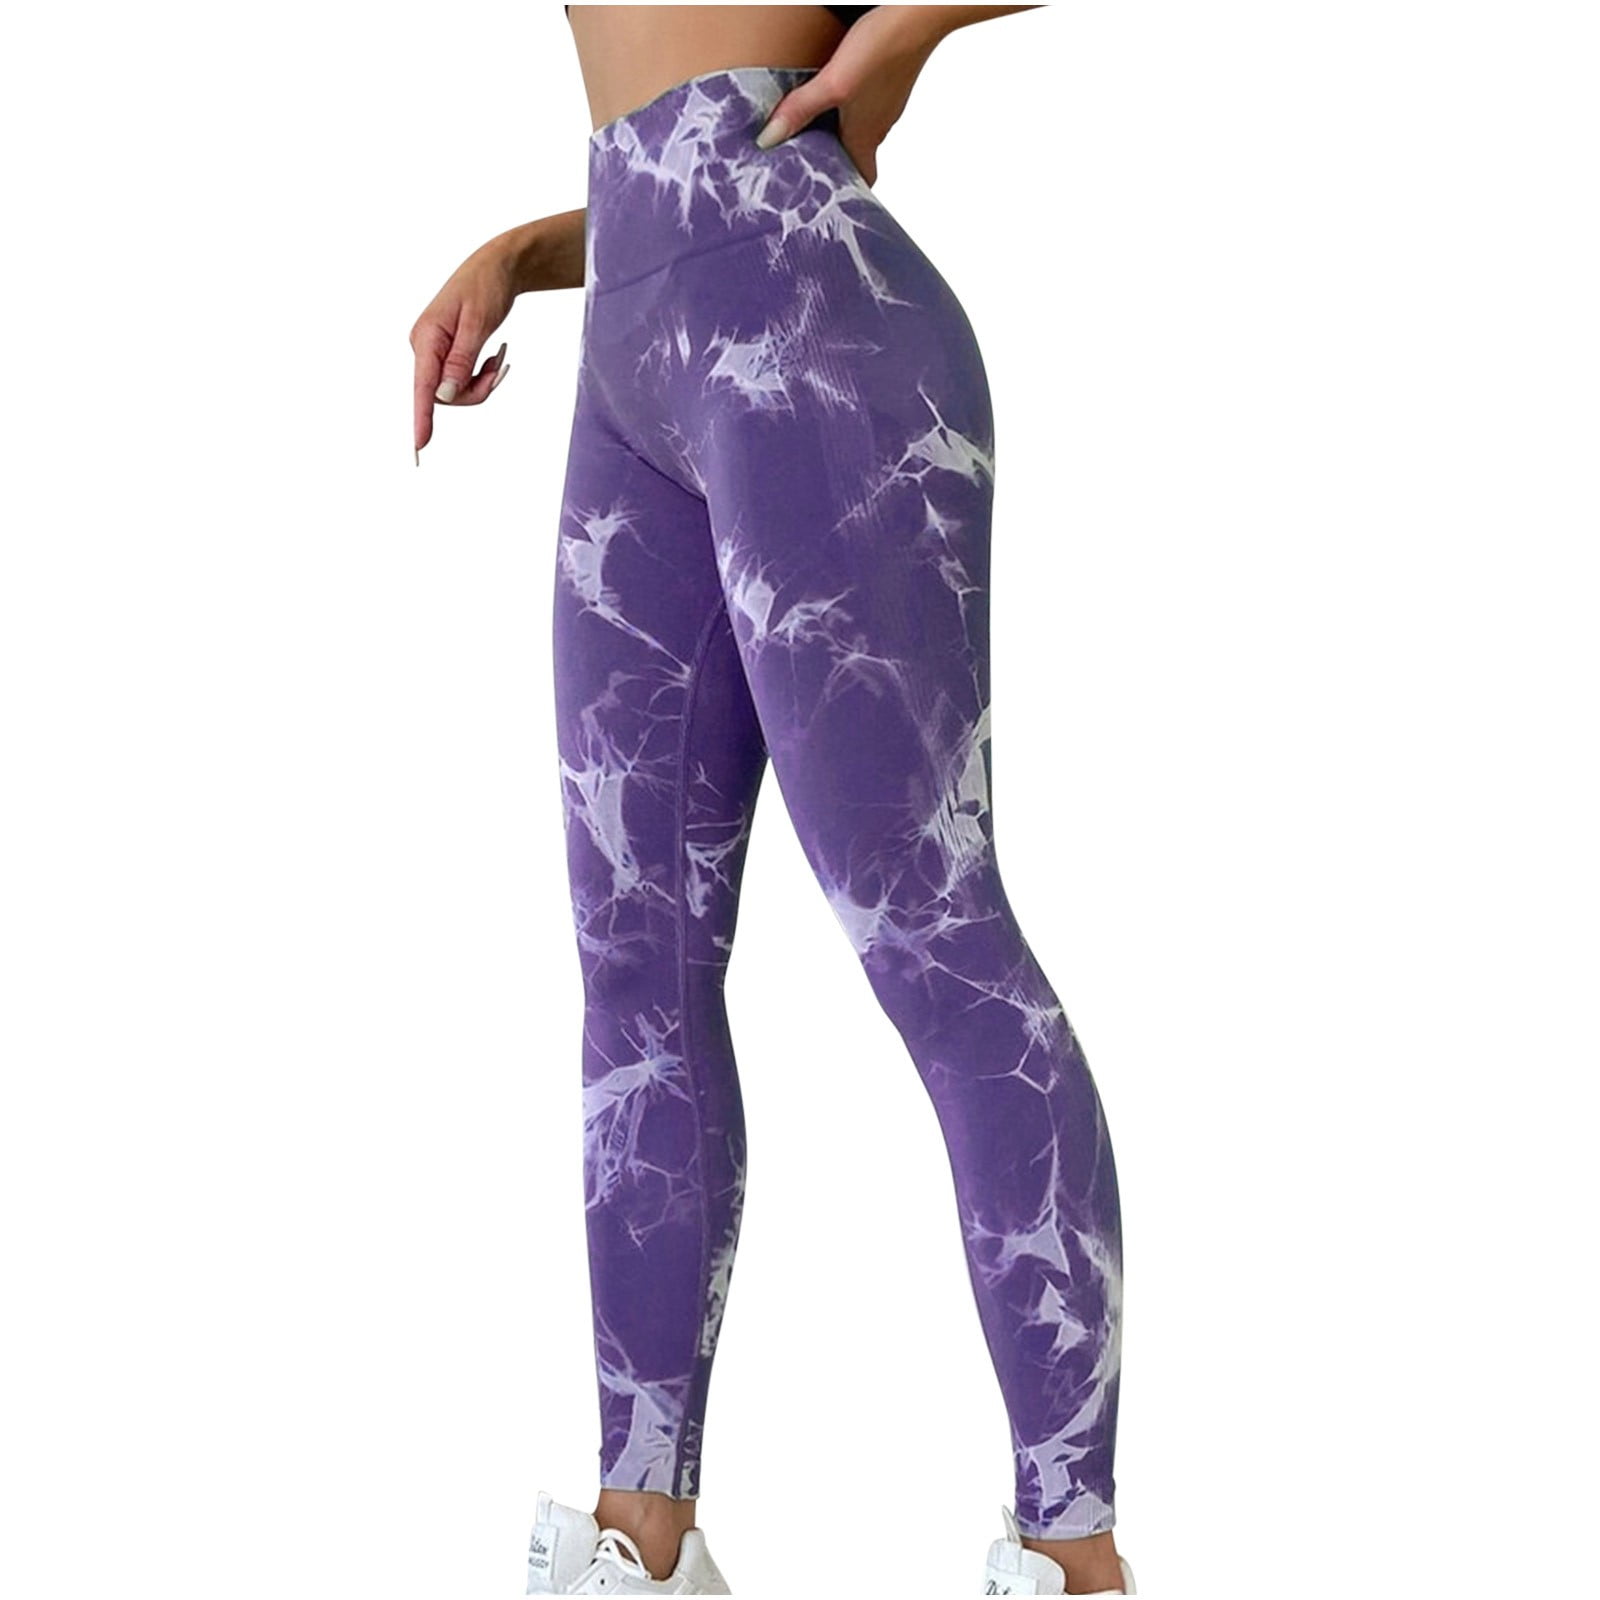 Tiedye Scrunch Butt Lift Workout Leggings Marble Womens Sports Seamless  Yoga Pants Fitness Gym Contour Ruched Booty Bum Tights - Yoga Pants -  AliExpress